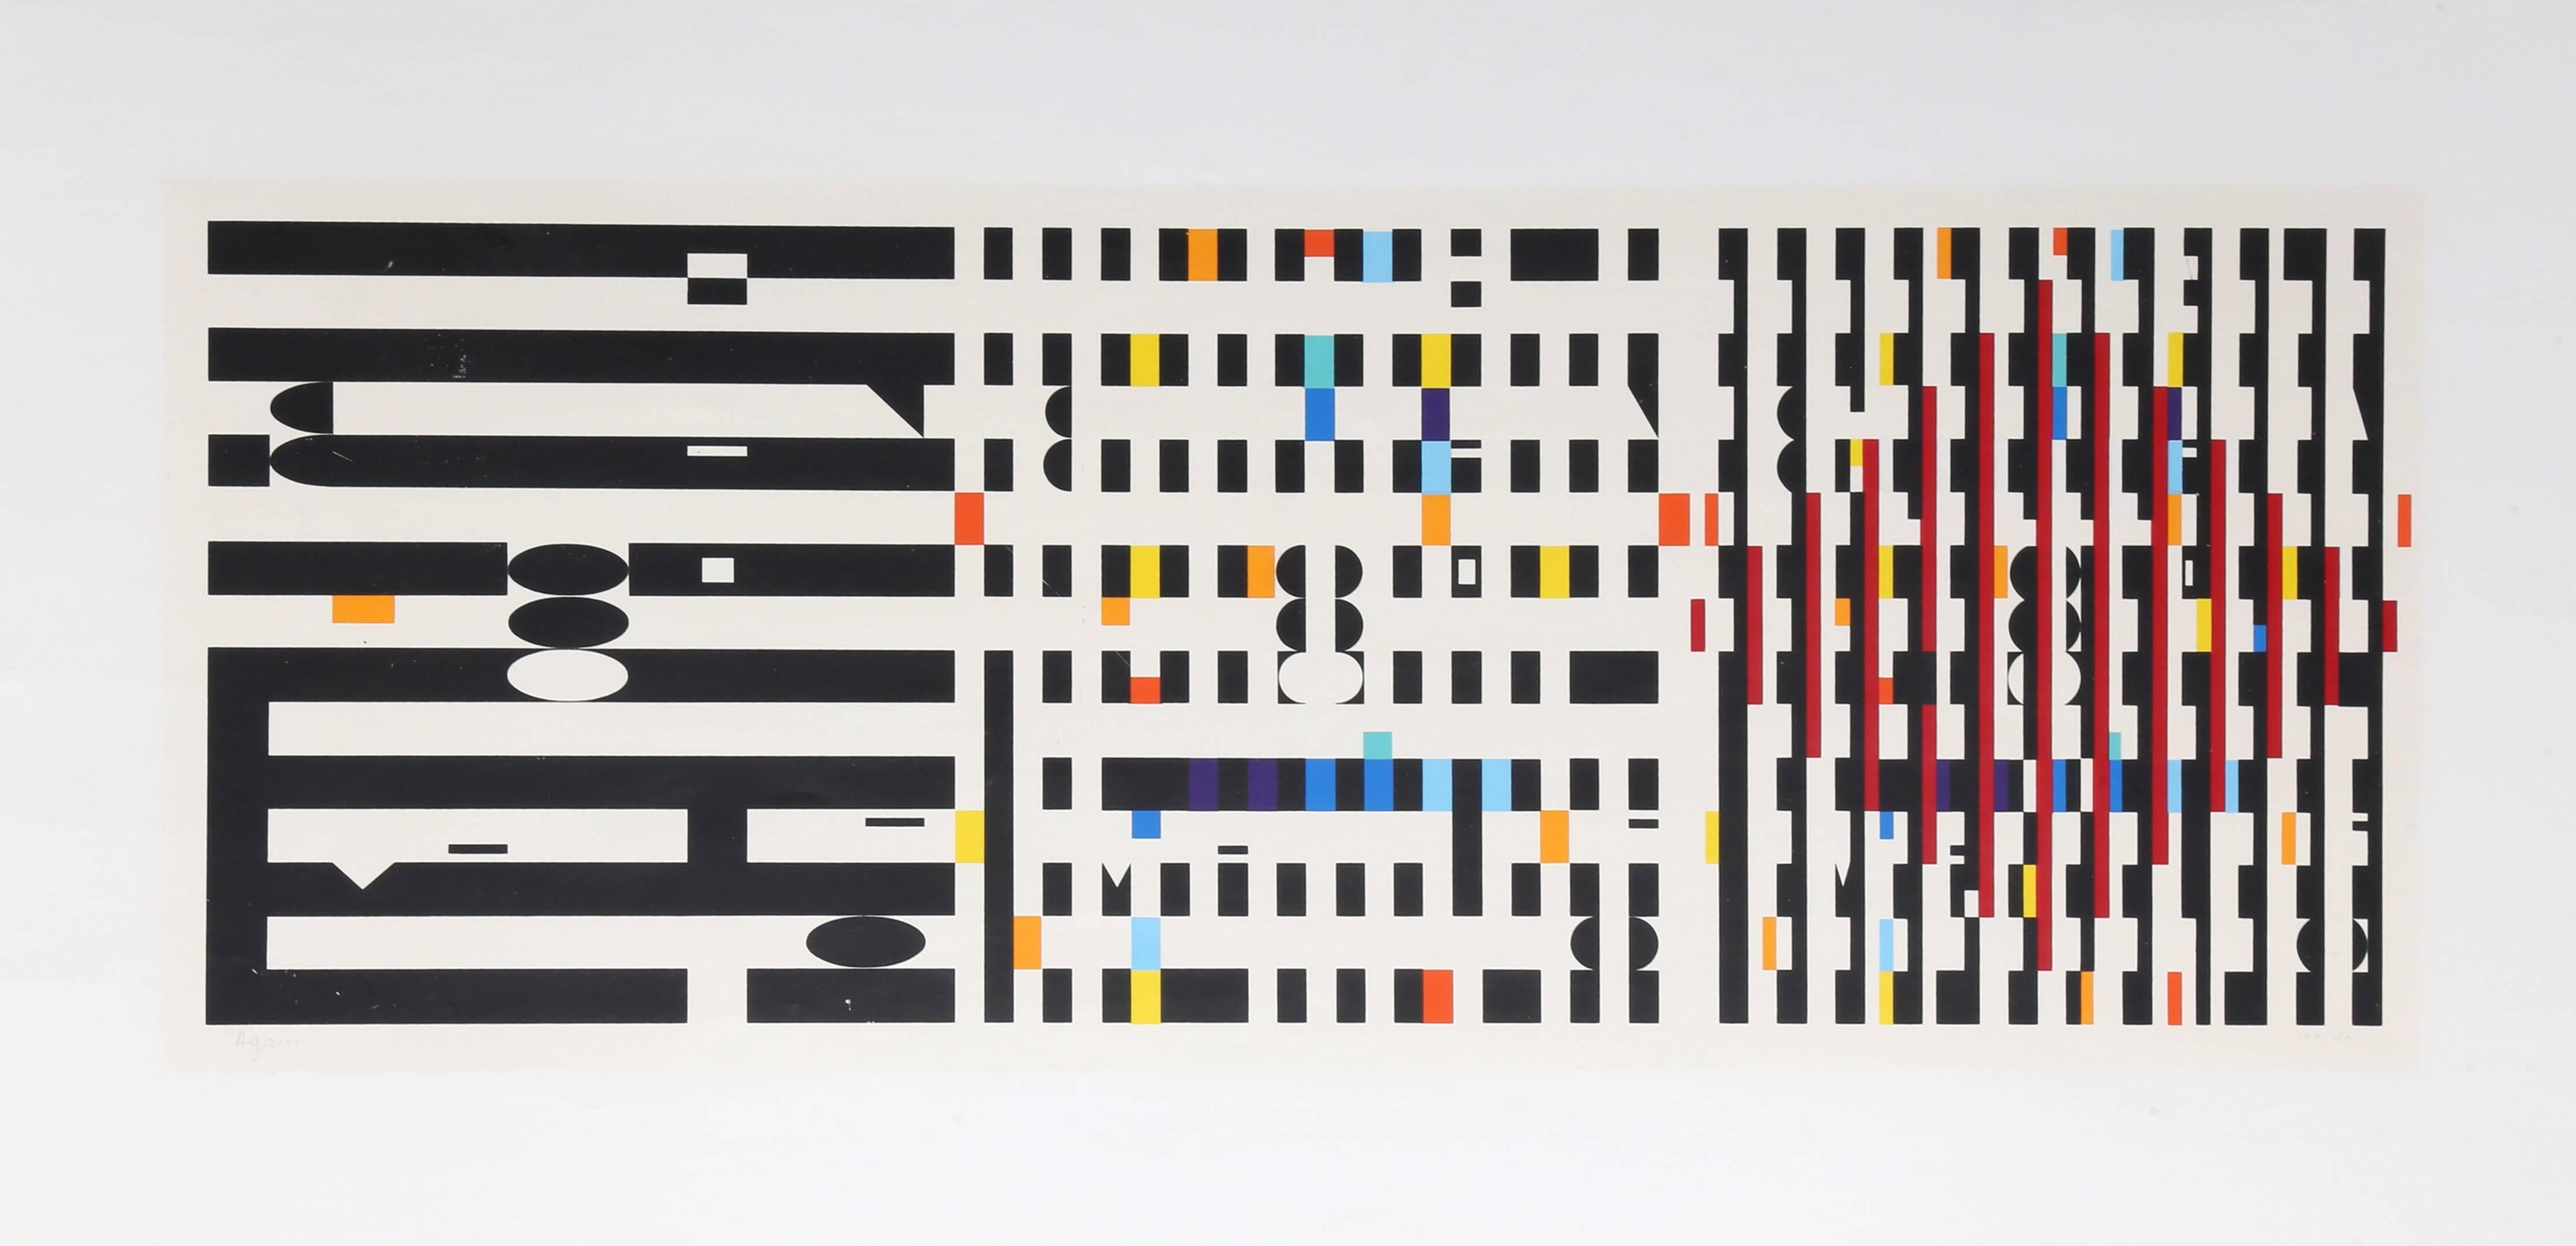 This screenprint was created by Israeli Op Artist Yaacov Agam. Agam is best known for his contributions to optical and kinetic art. His nonrepresentational style is an integration of formalist art with the study of Hebrew mysticism. His work is